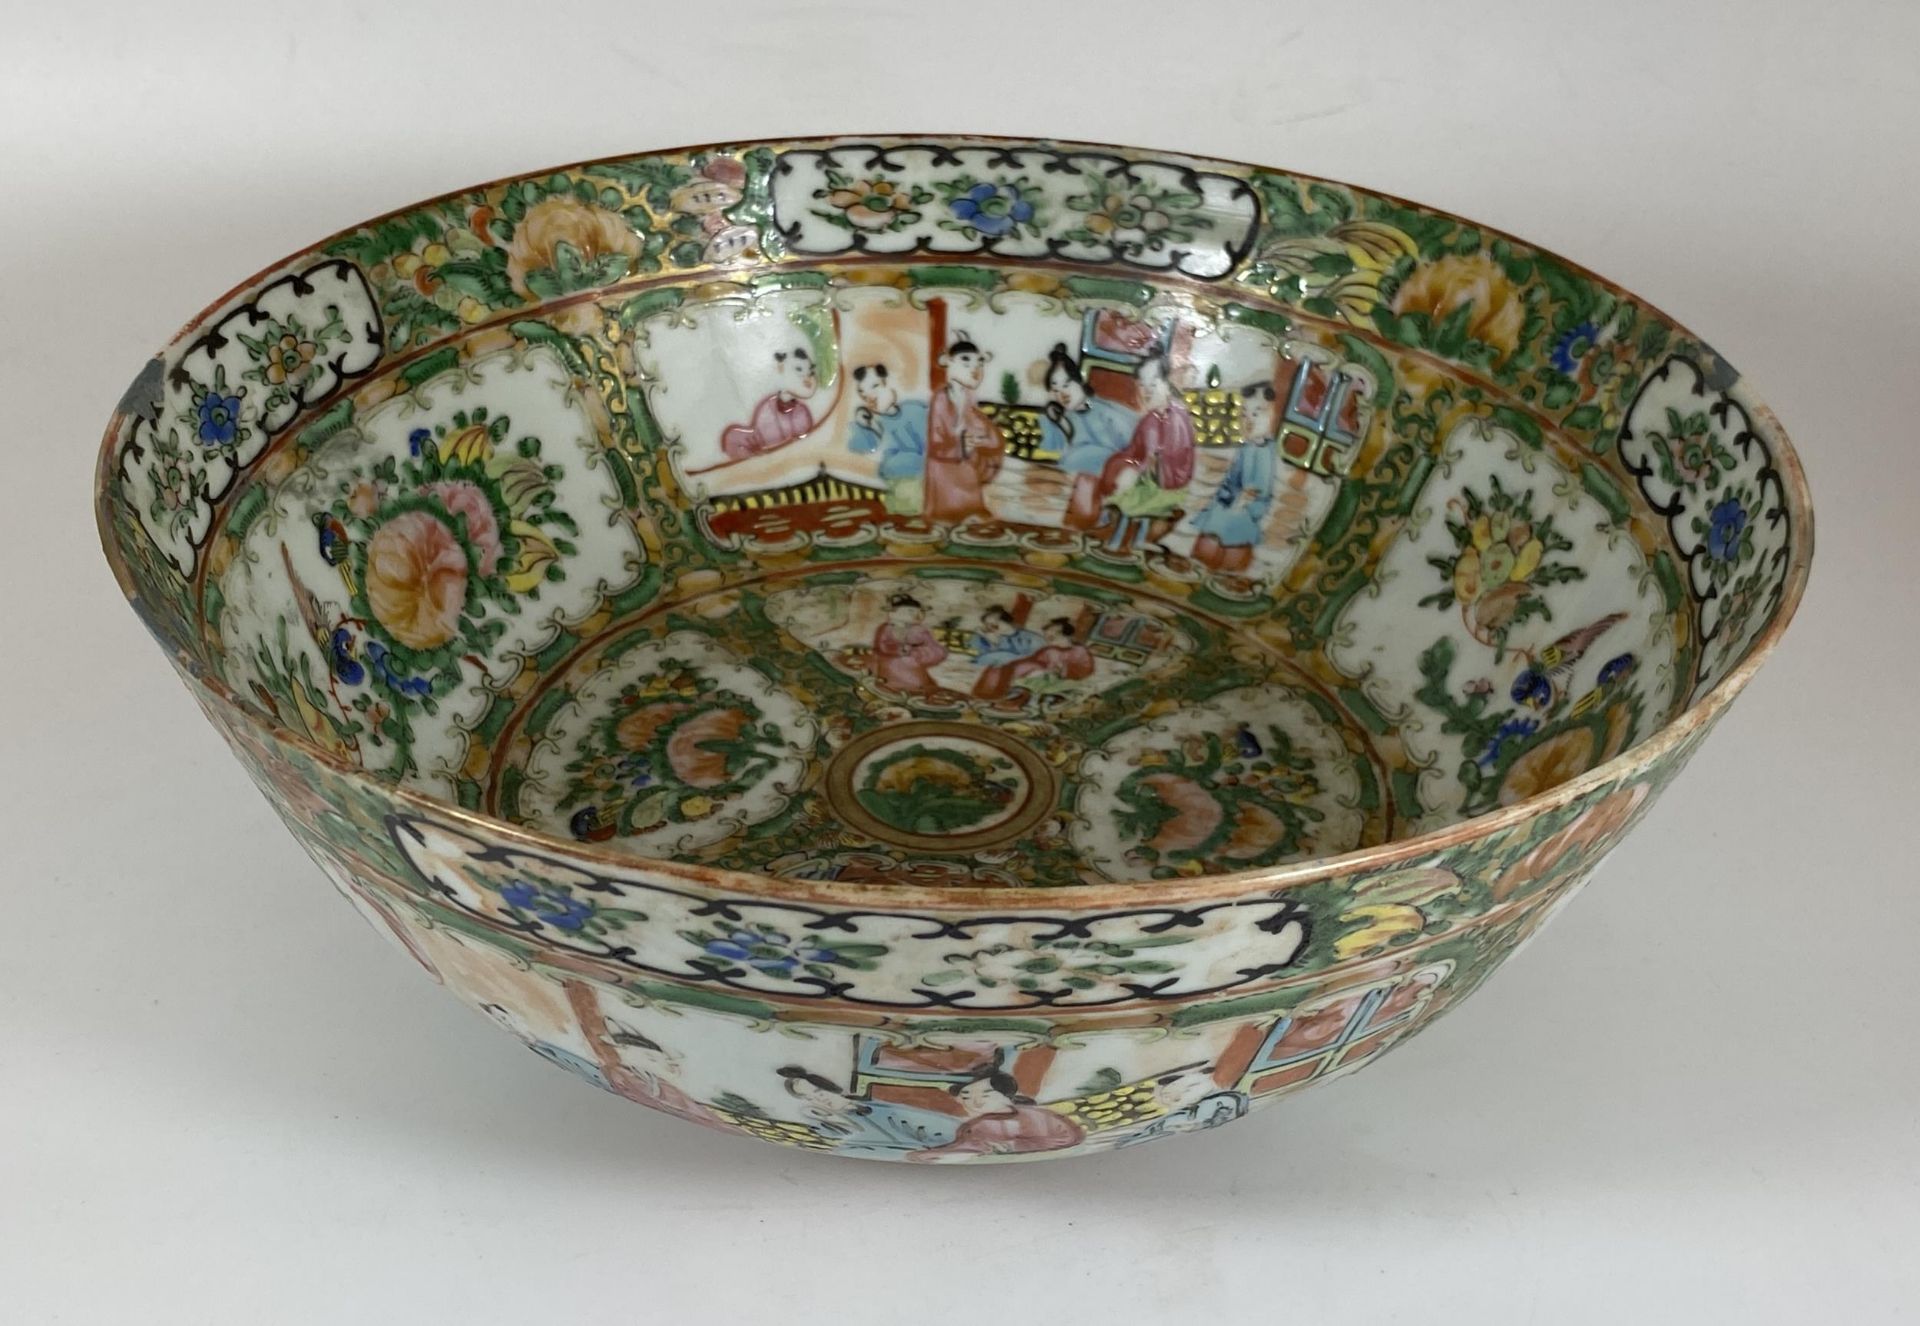 A 19TH CENTURY CHINESE CANTON FAMILLE ROSE MEDALLION PUNCH / FRUIT BOWL WITH FIGURES, BIRDS AND